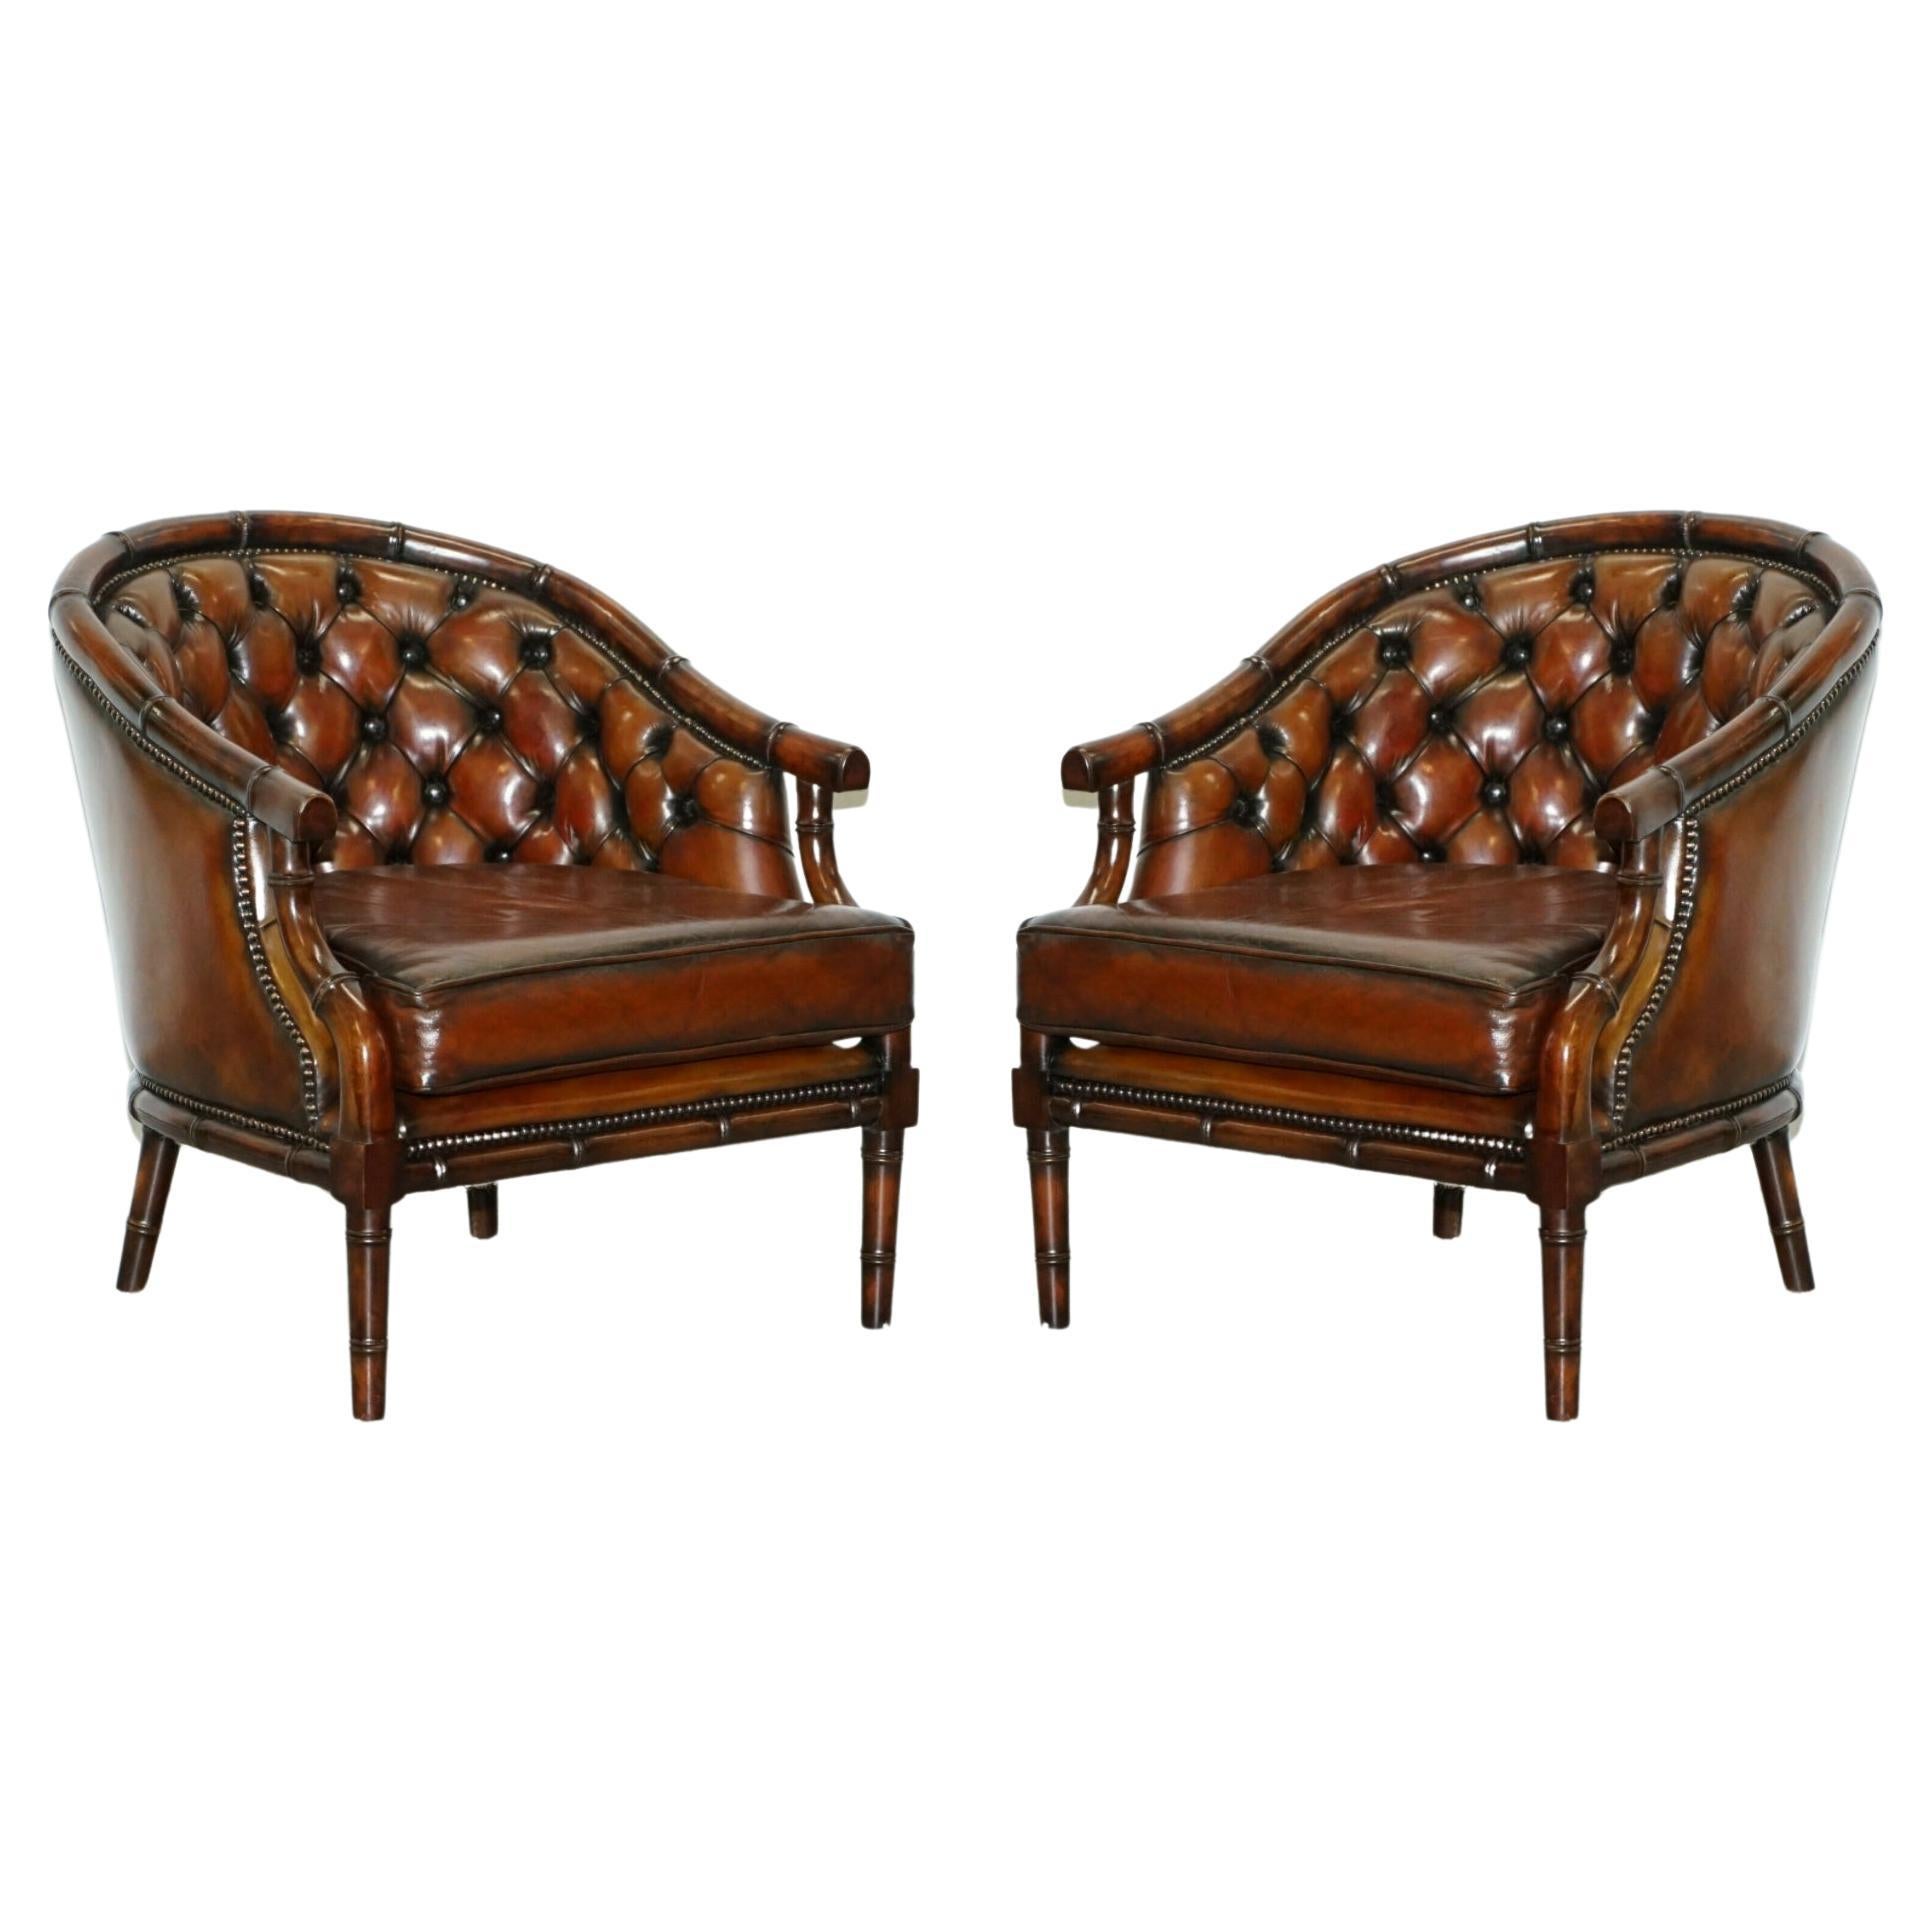 Pair of Restored Chesterfield Tufted Brown Leather Hand Dyed Famboo Armchairs